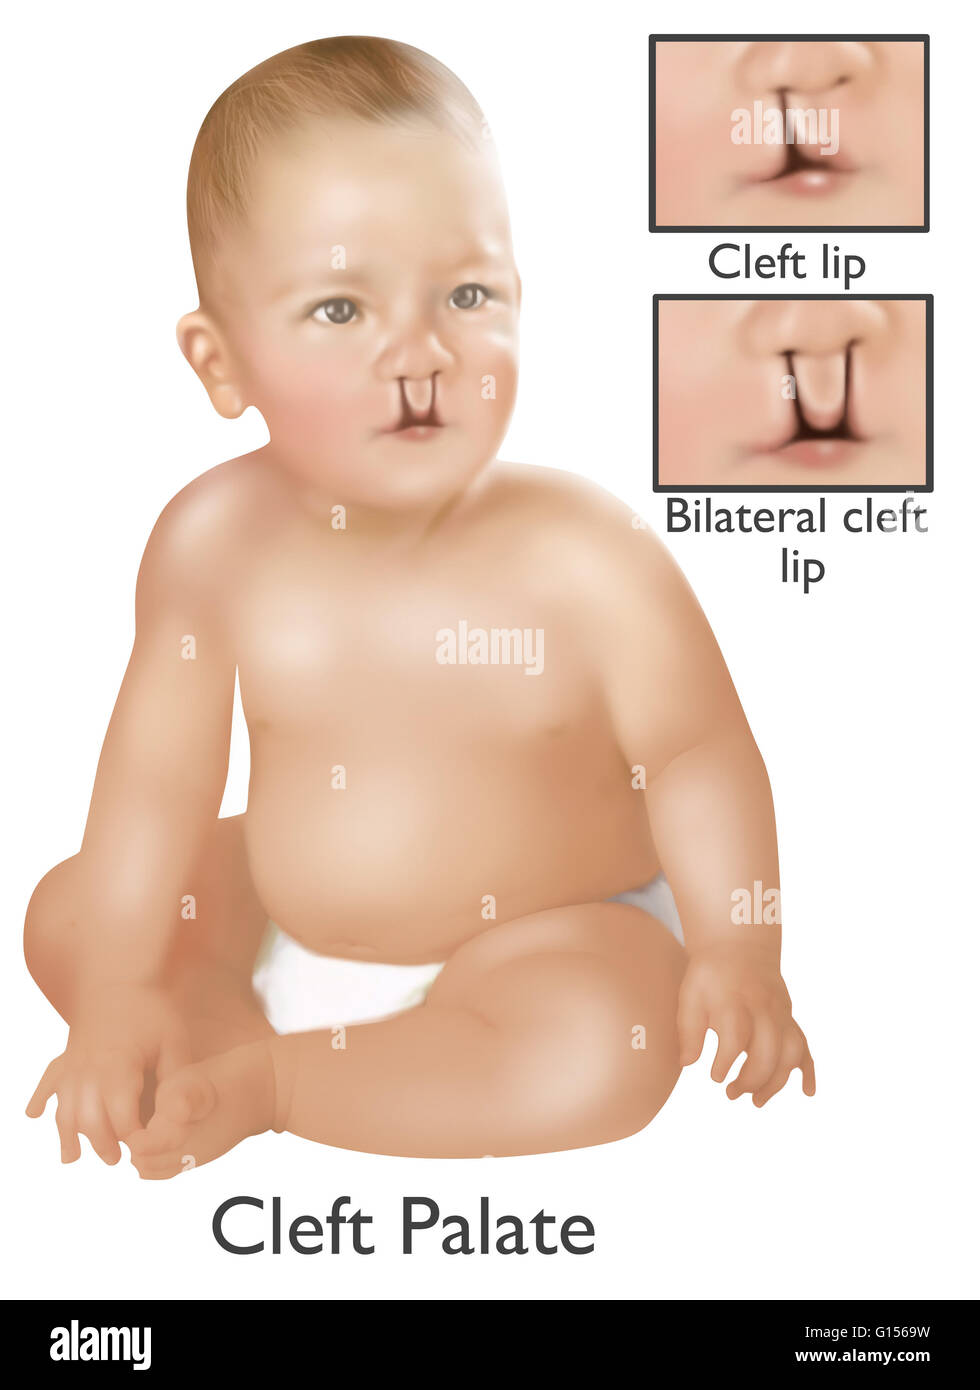 An illustration of a baby with a cleft palate. A cleft palate is a congenial deformity resulting in an opening in the upper lip by failure of the facial structures to fuse. The cleft palate opening can be a one sided unilateral or two sided bilateral. 1 b Stock Photo